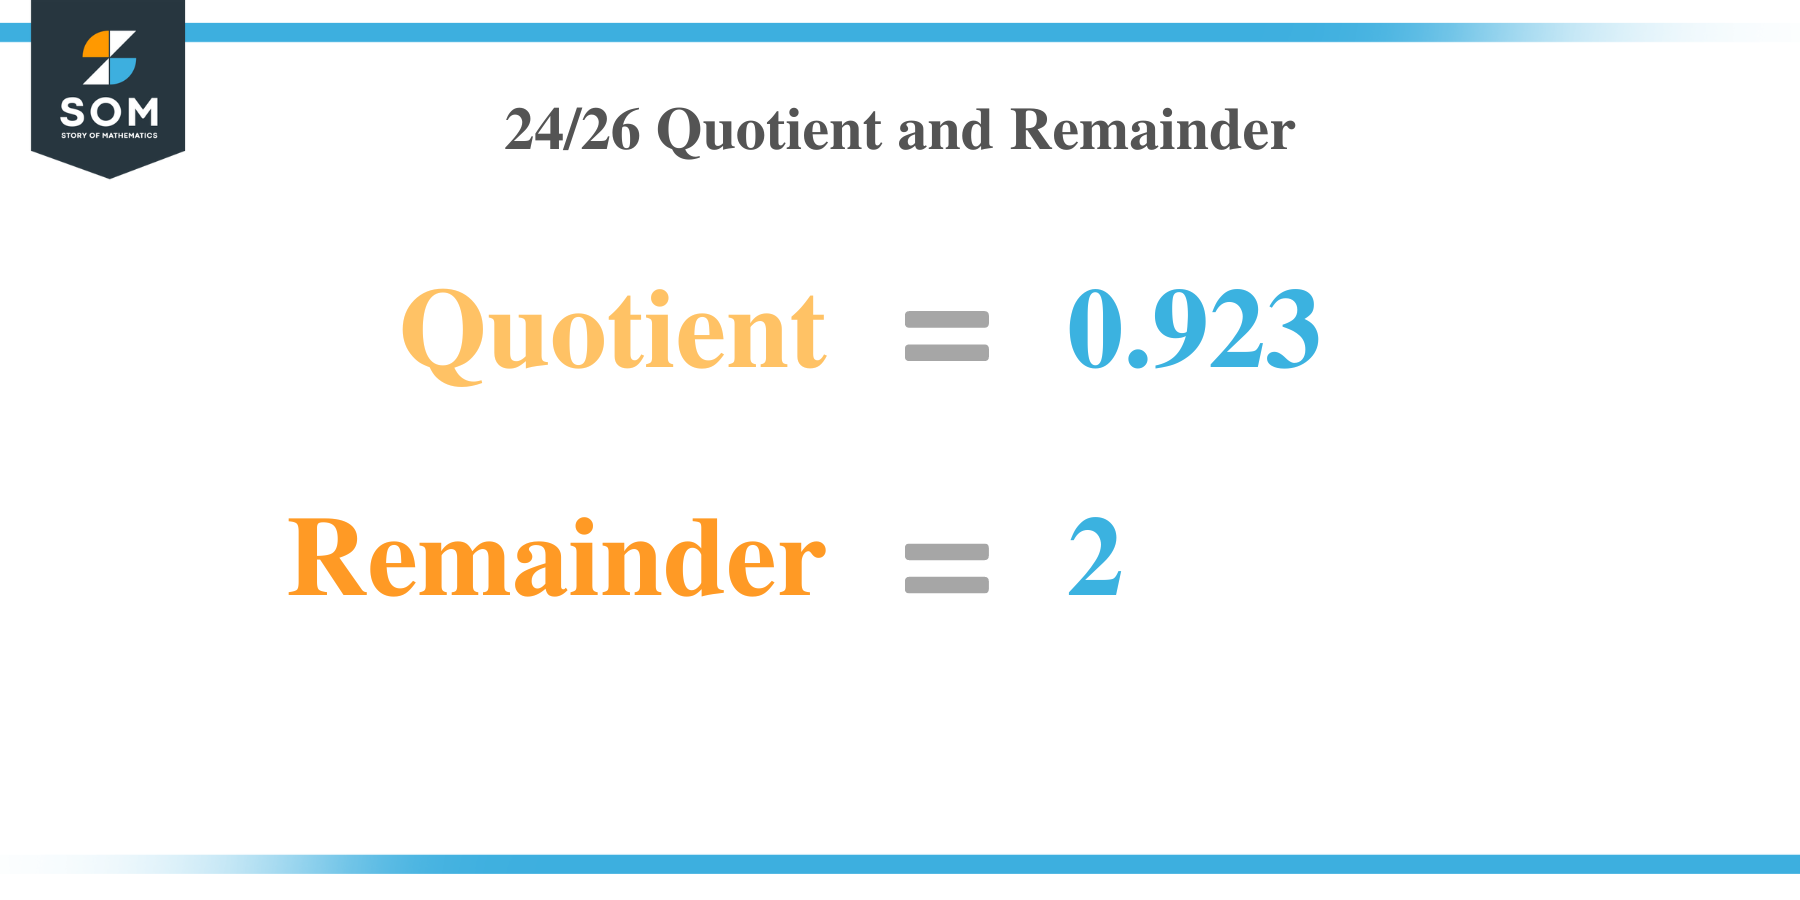 24 by 26 Quotient and Remainder